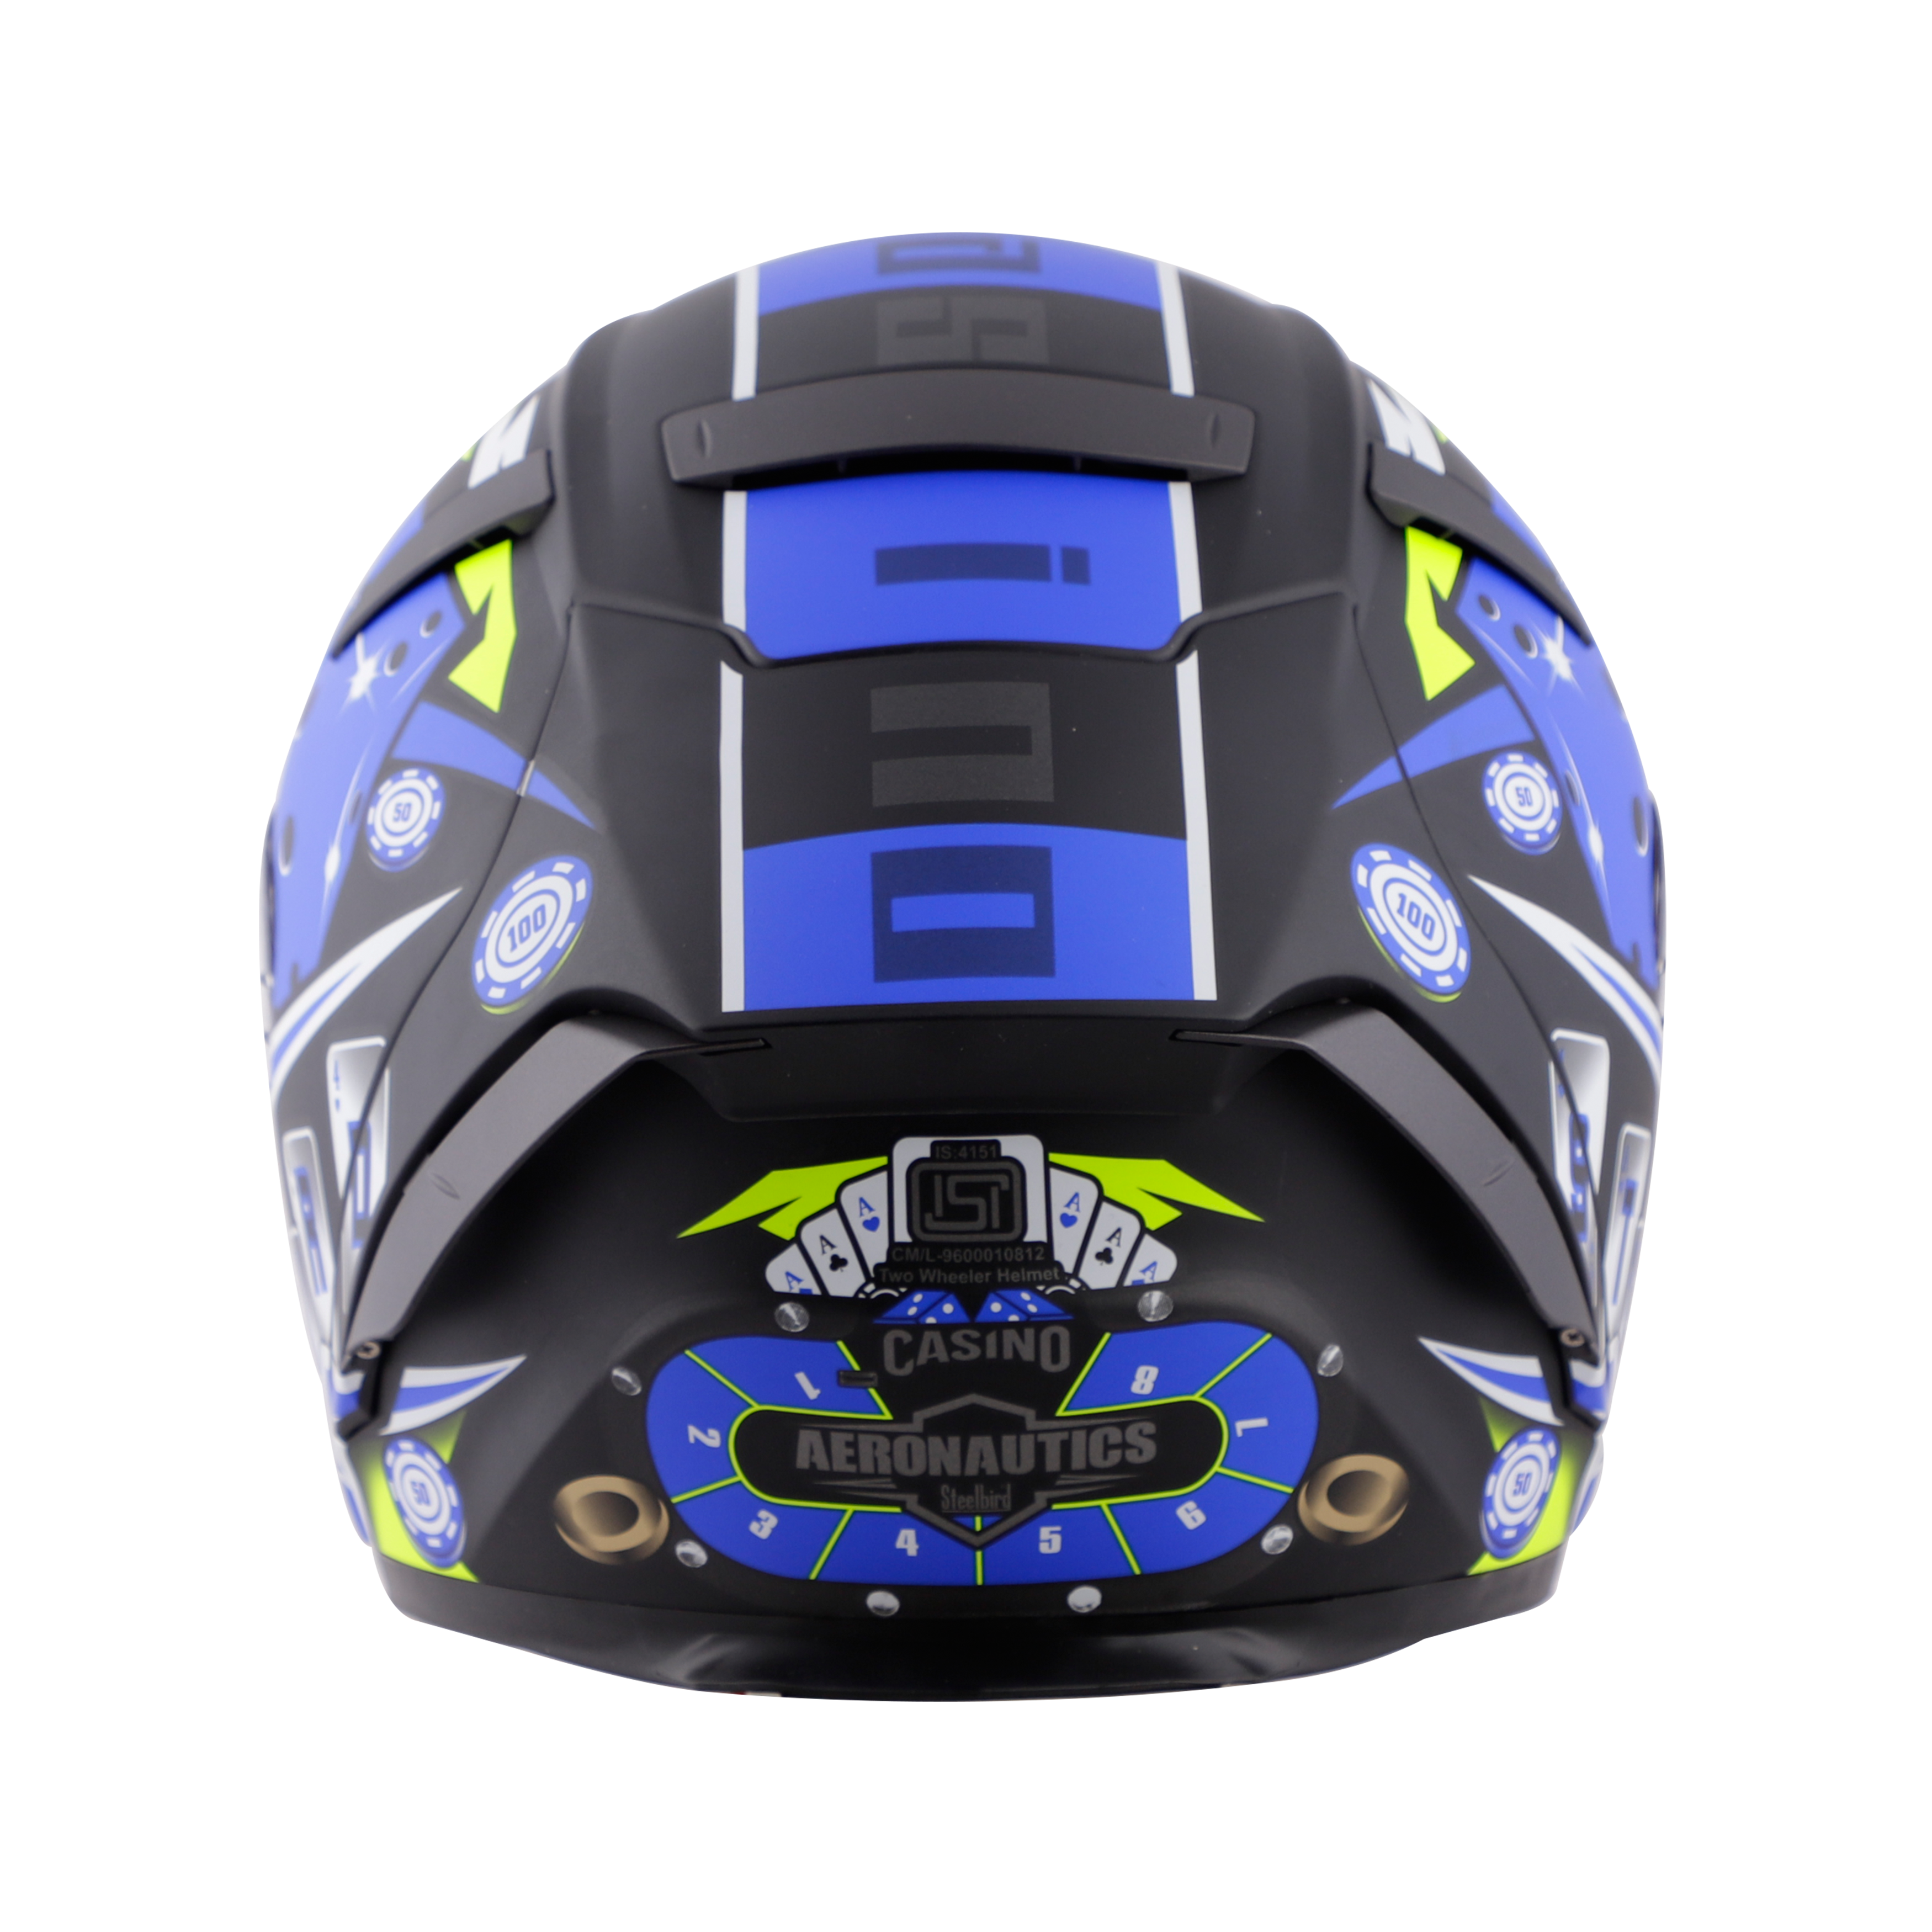 SA-2 CASINO GOLSSY BLACK WITH BLUE ( FITTED WITH CLEAR VISOR EXTRA RAINBOW CHROME VISOR FREE WITH ANTI-FOG SHIELD HOLDER)